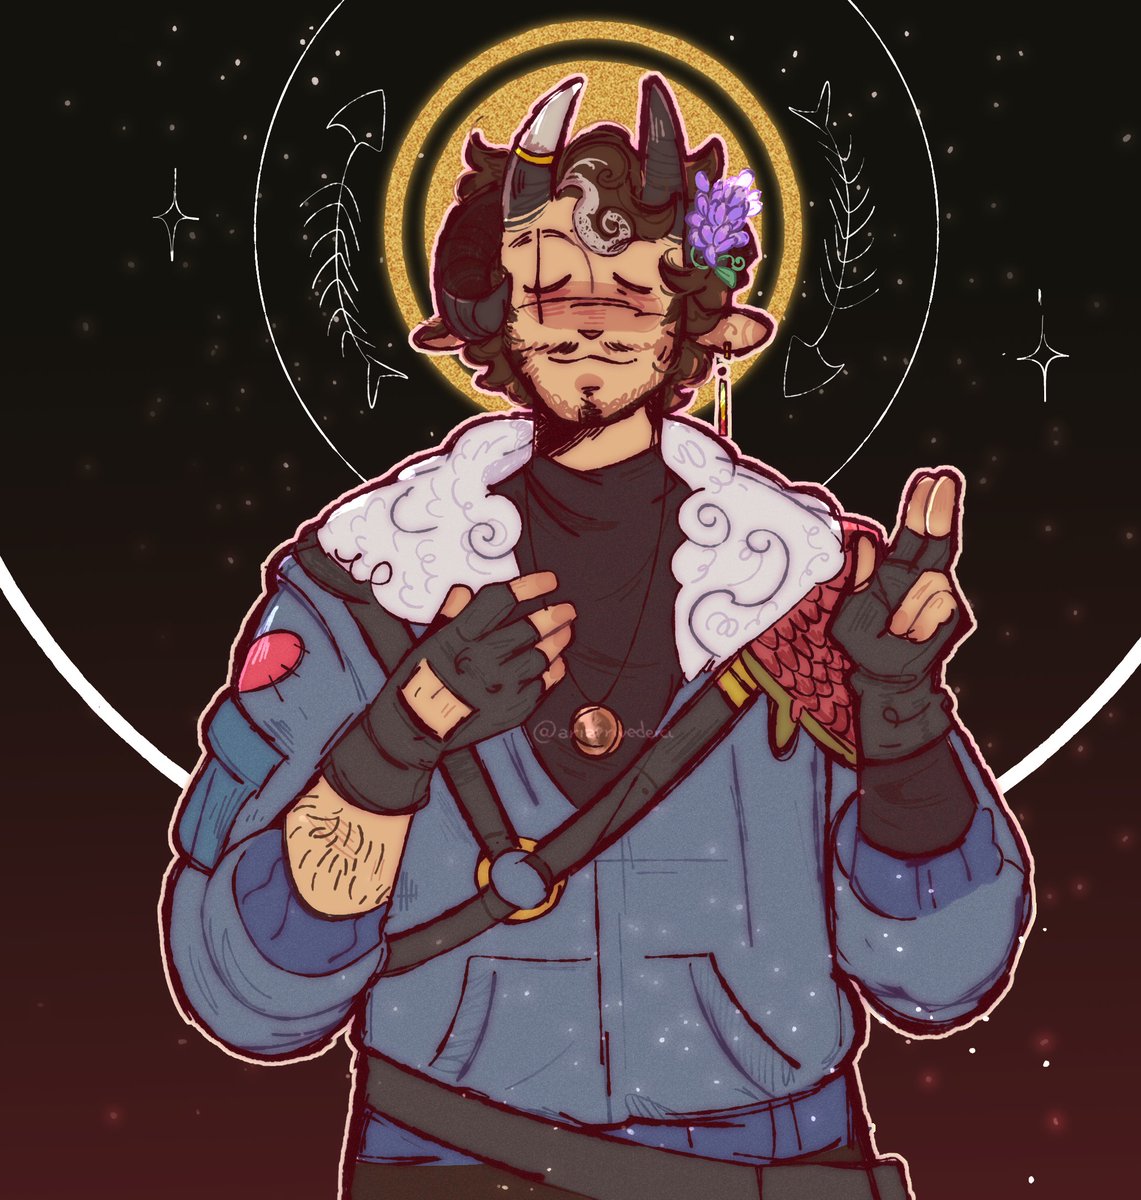 So I heard he wants to start a cult. i wonder whatever I could link that to.🤔🤔(it's Ghost songs)

Lilac flower in his hair (cuz Jimmy), Salmon shoulder plate, goat/sheep symbolism (jacob sheep horns)

[ #minecraftsos #minecraftsosfanart #mythicalsausagefanart @Mythicalsausage ]